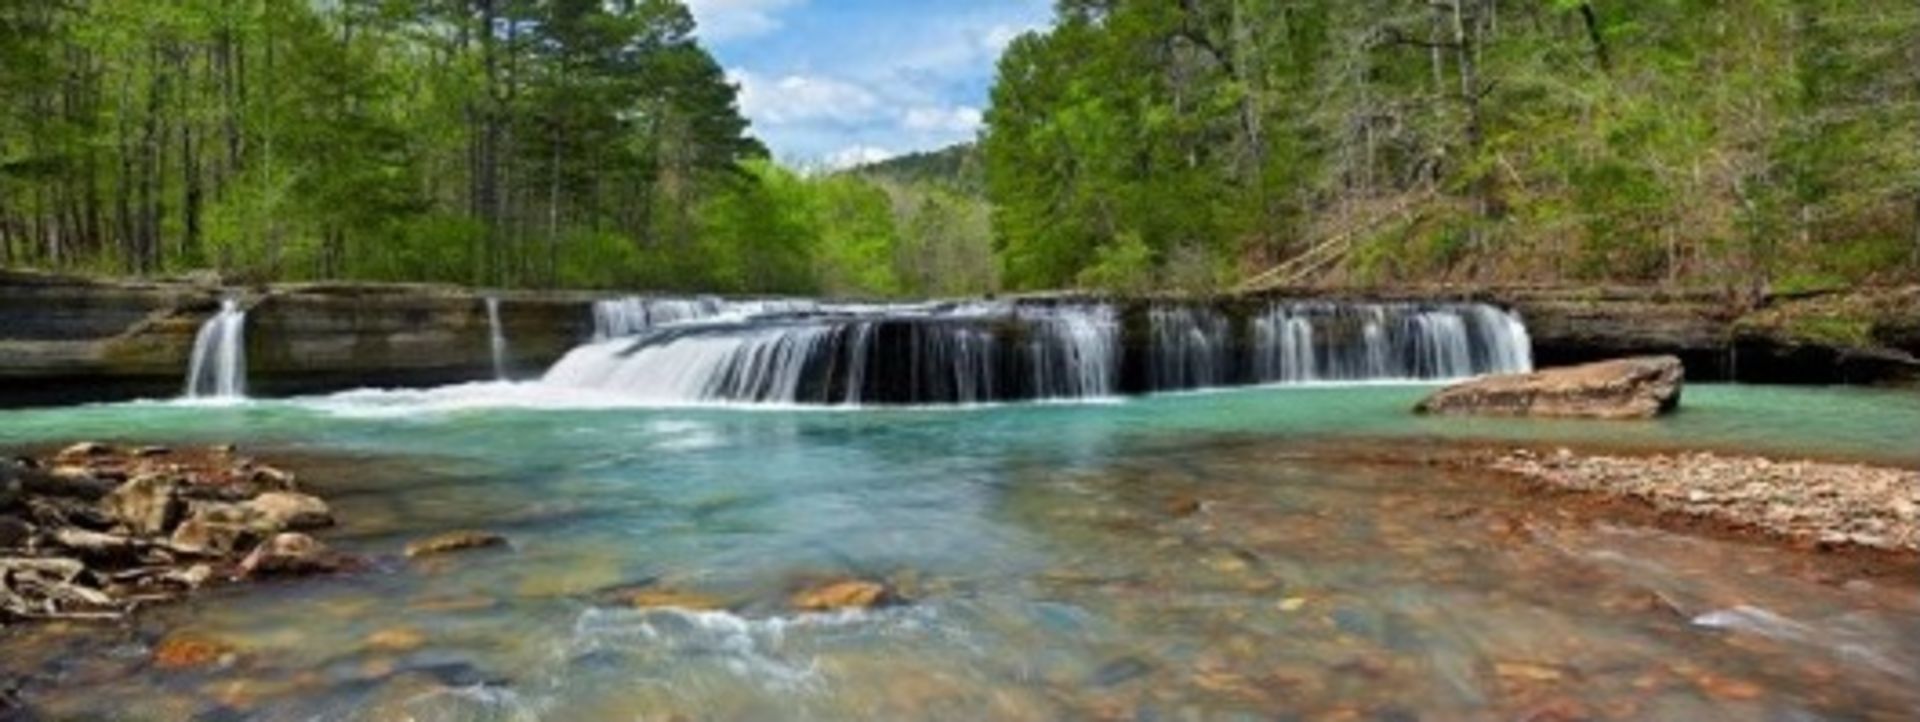 DIAMOND CITY - THE PARADISE IN ARKANSAS!!! YOU ARE BUYING ALL 4 PLOTS (SEE PICTURES) - Image 6 of 6